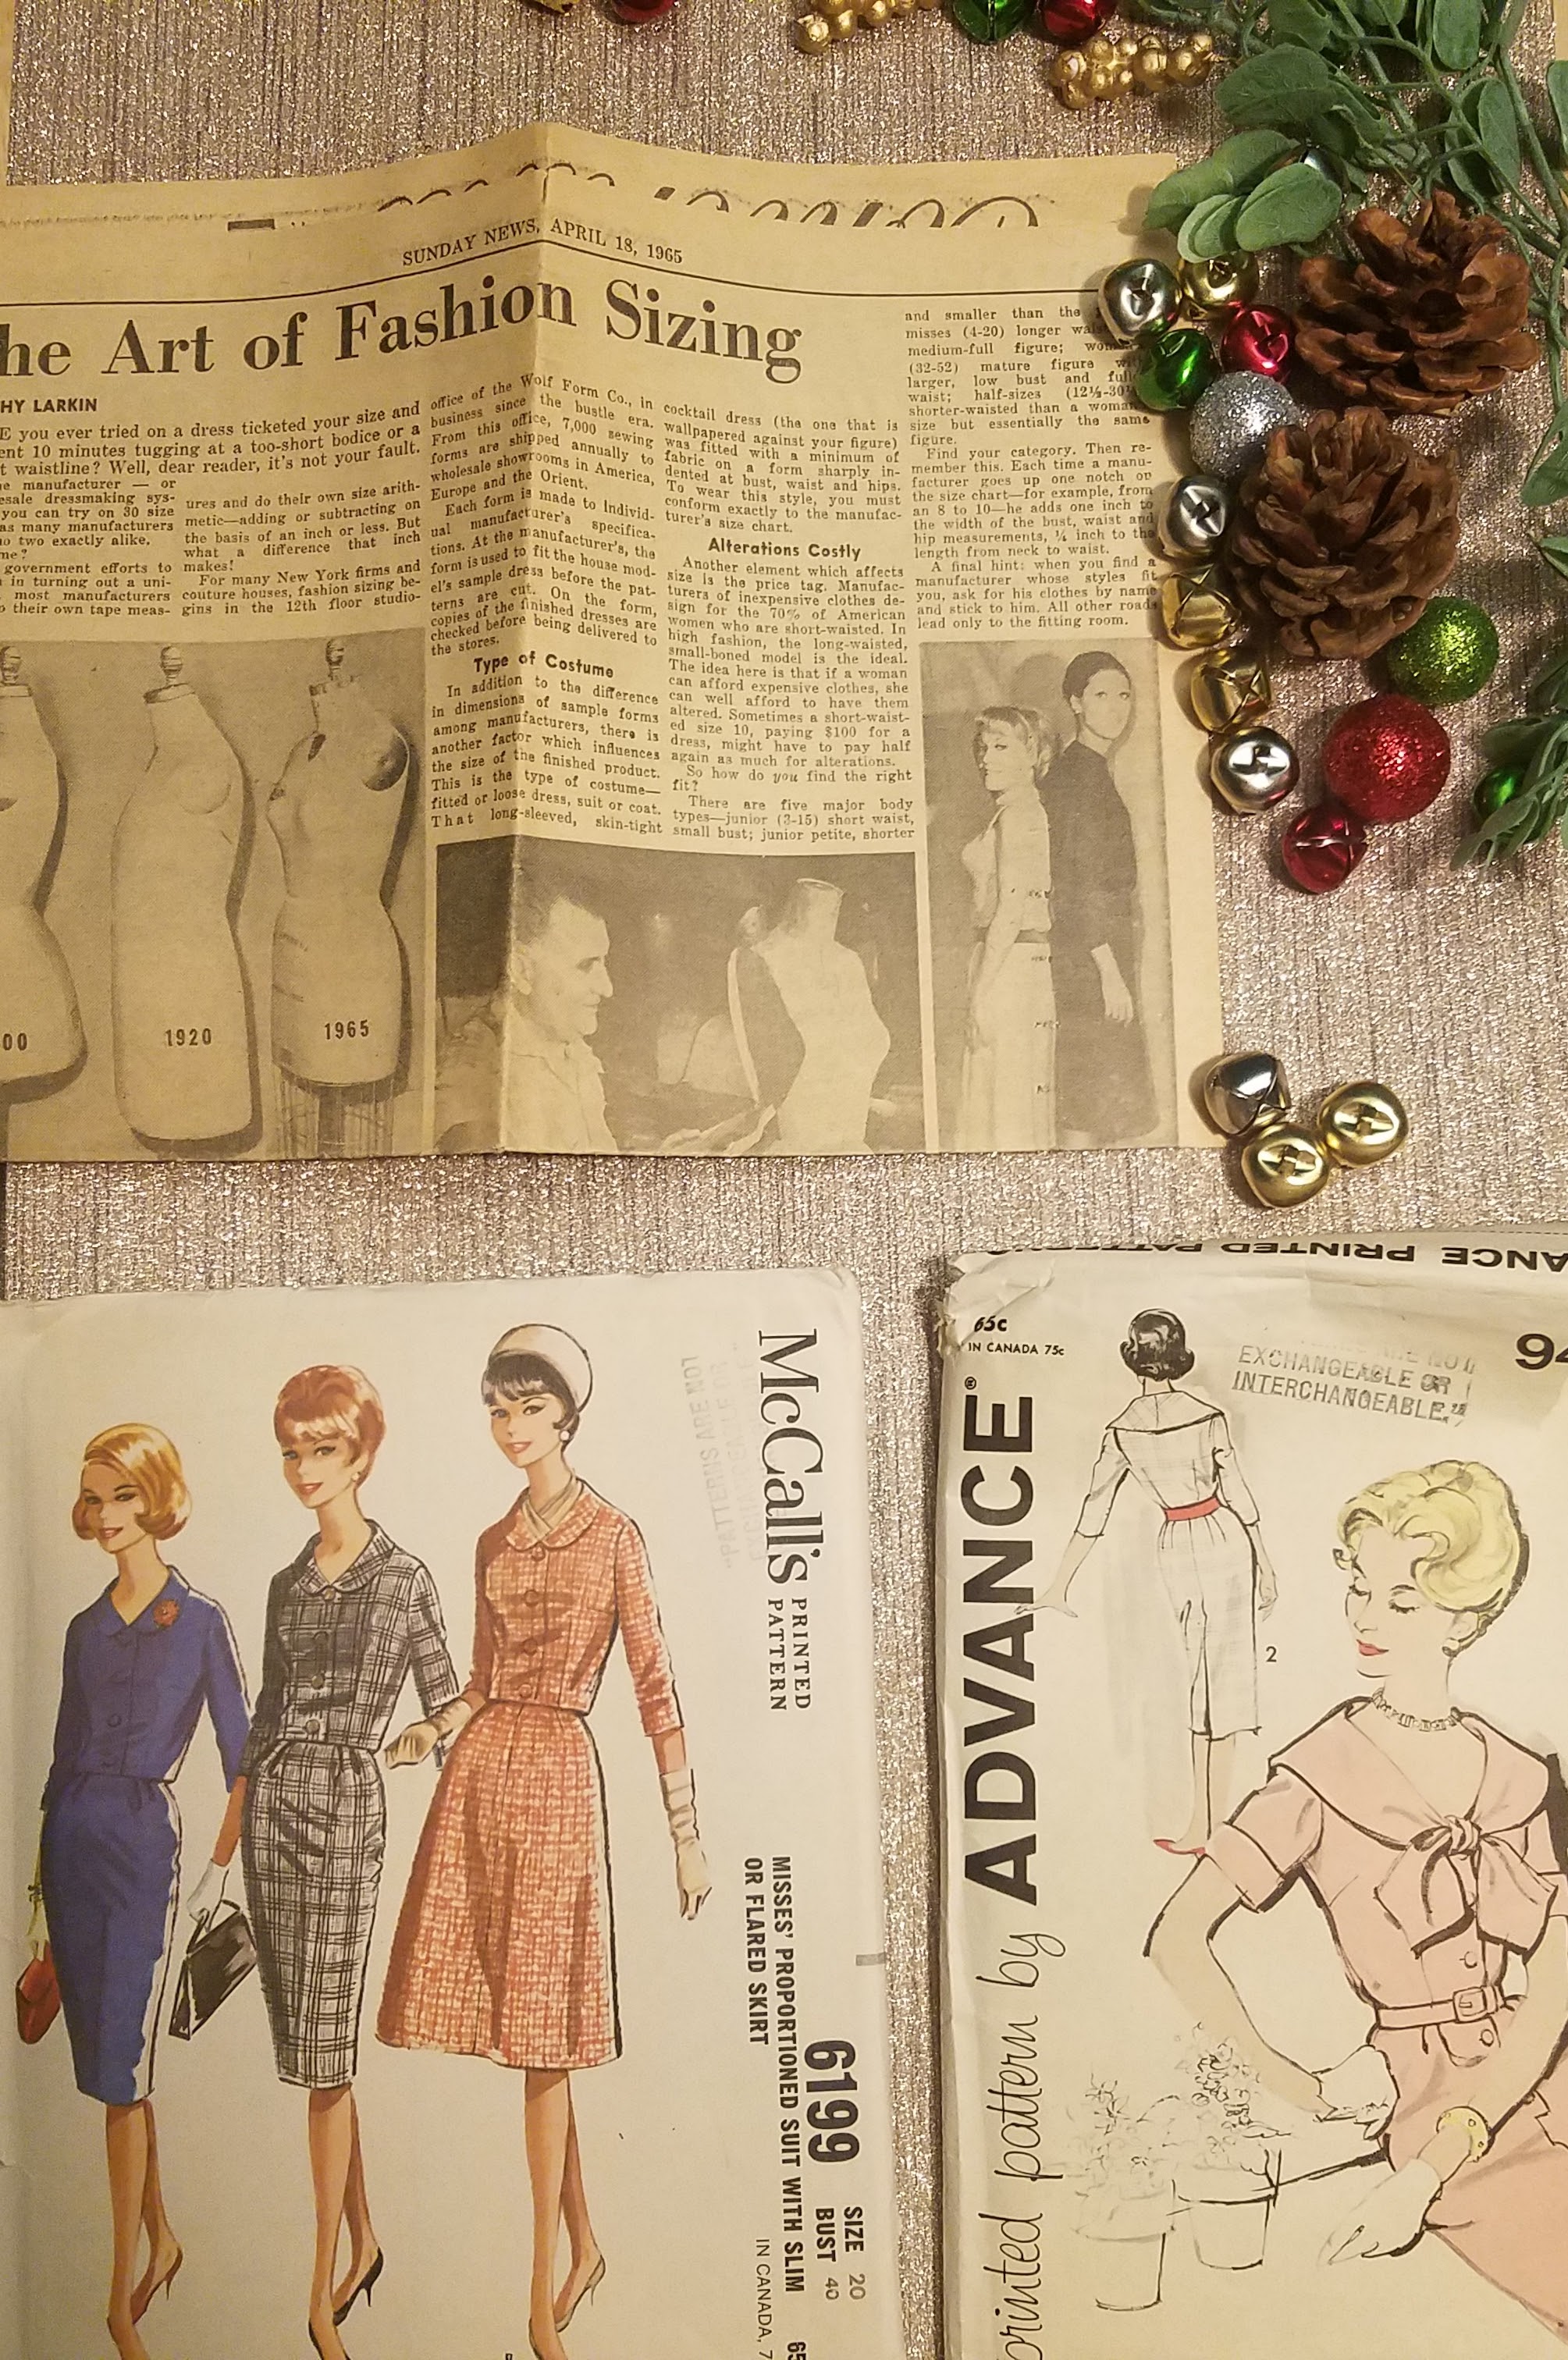 An introduction to Christian Dior - The Vintage Pattern Shop